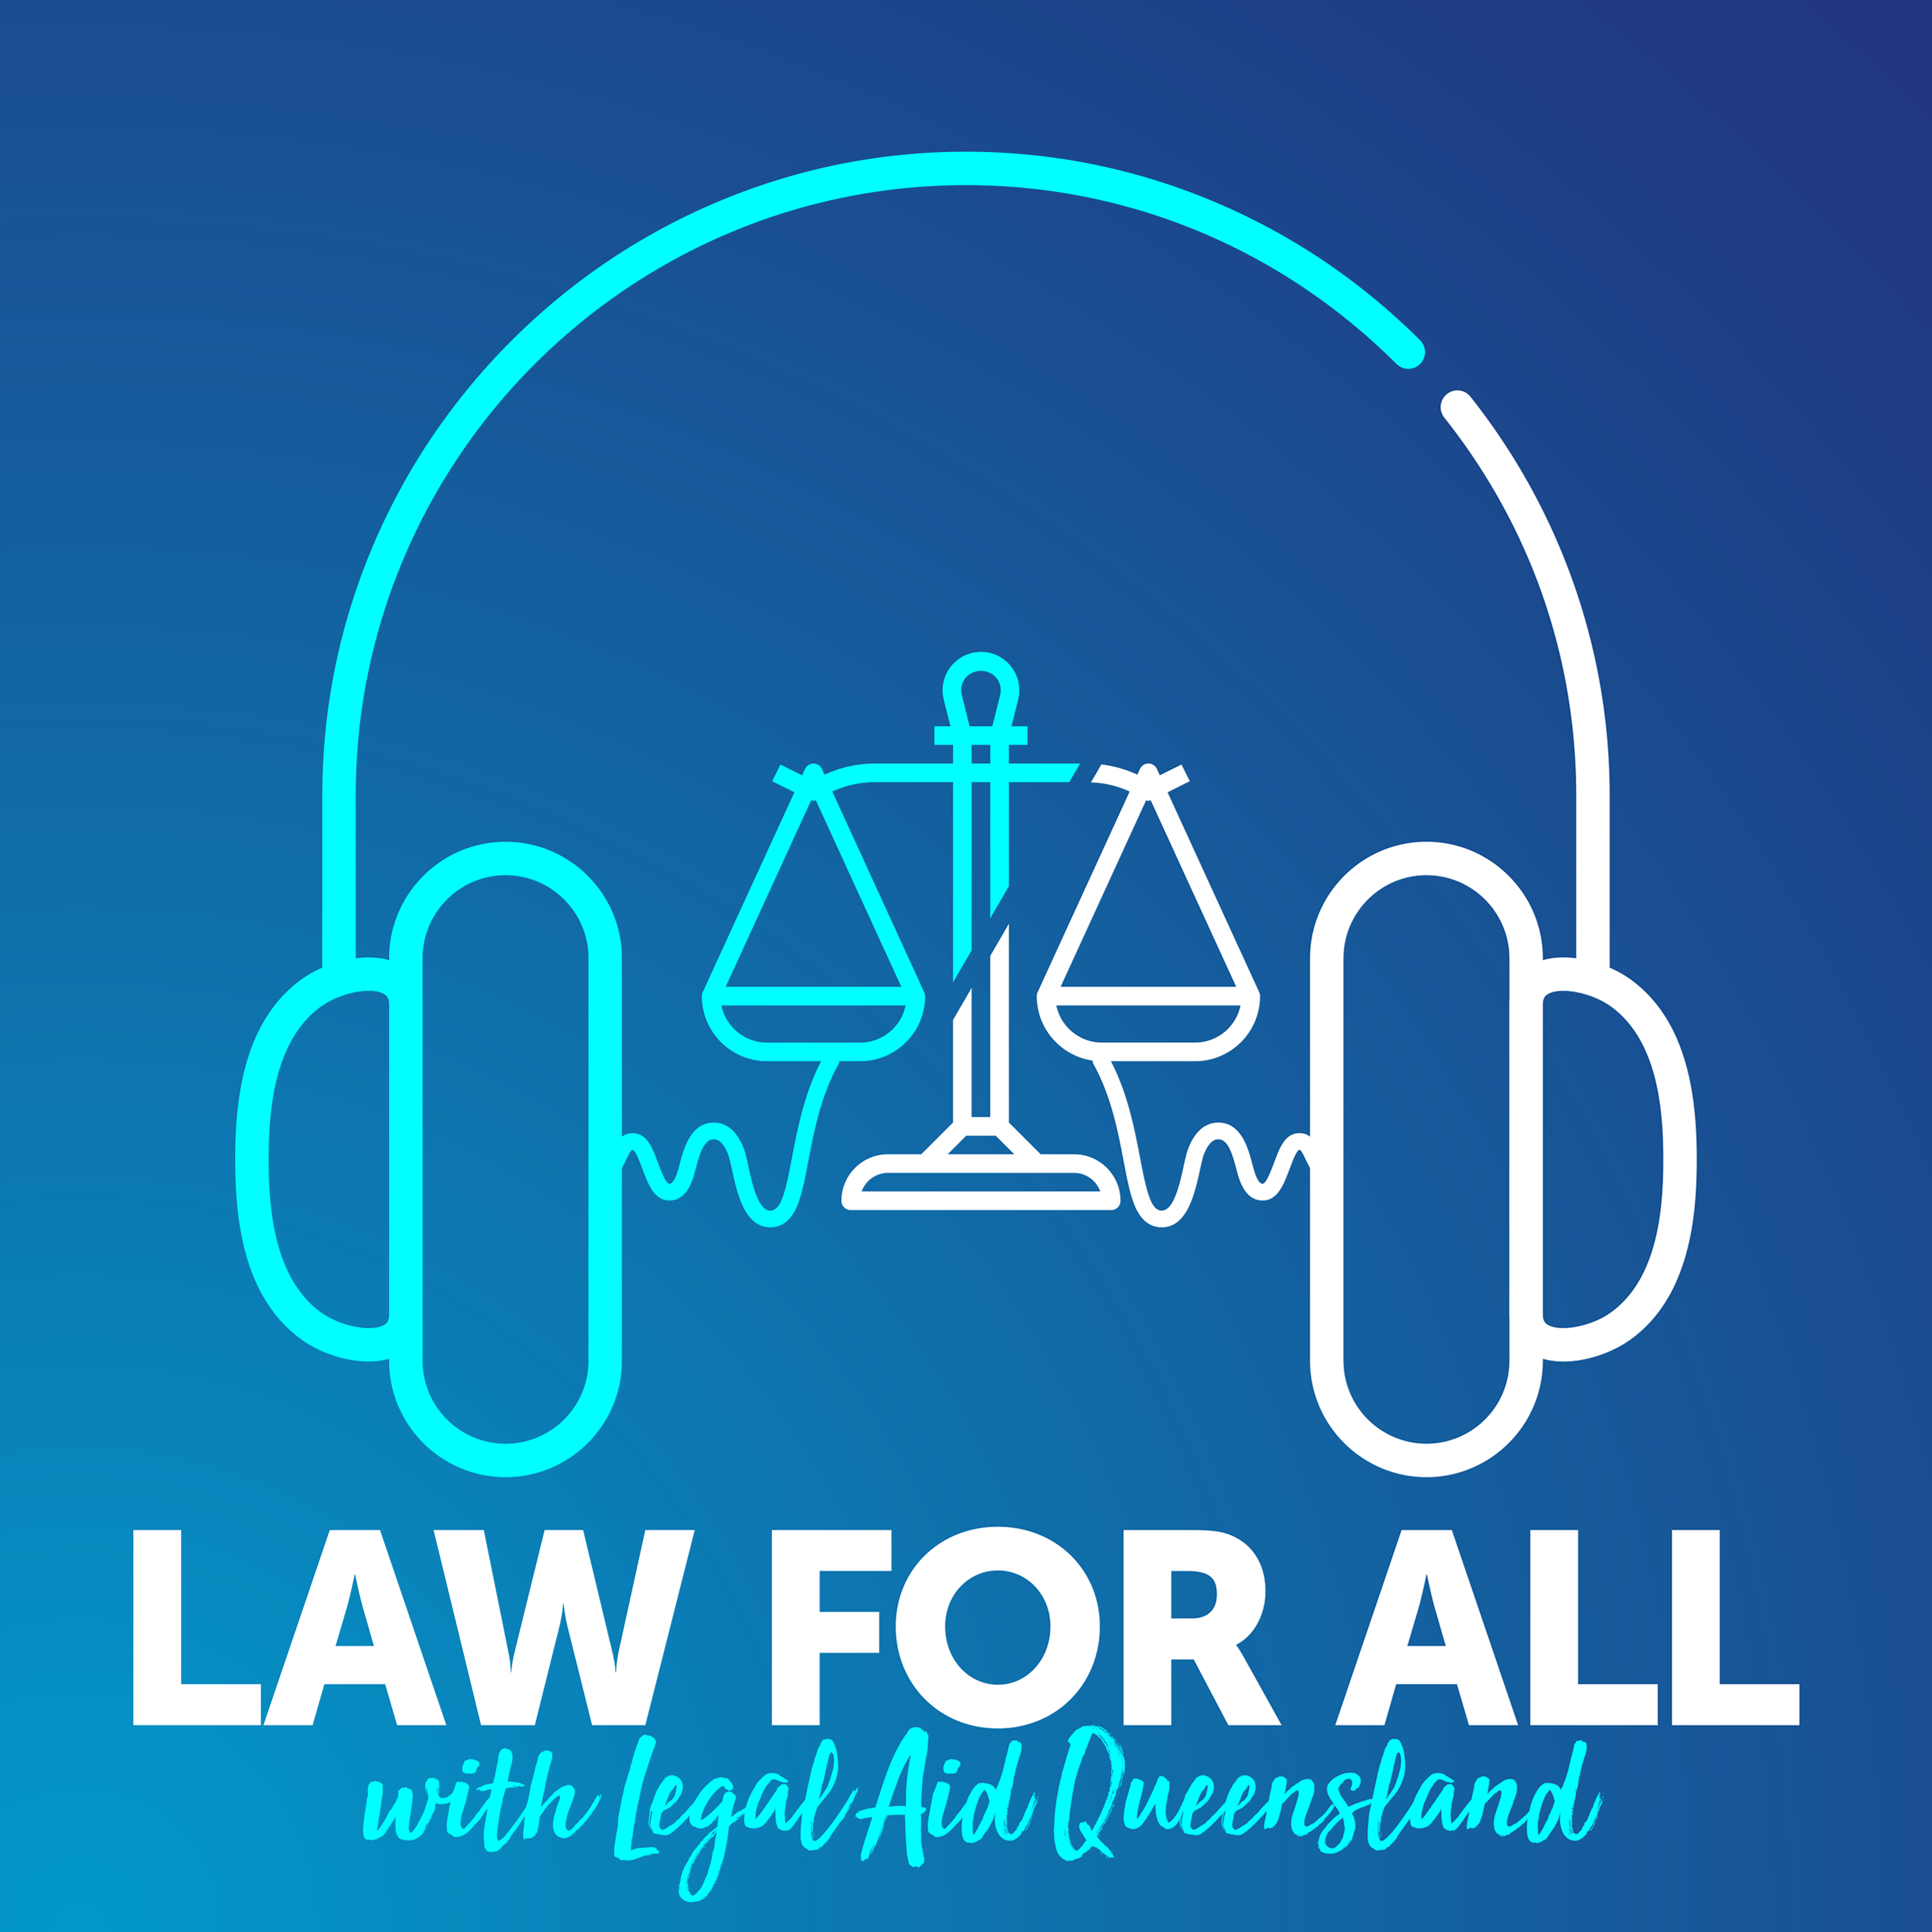 The Law For All podcast